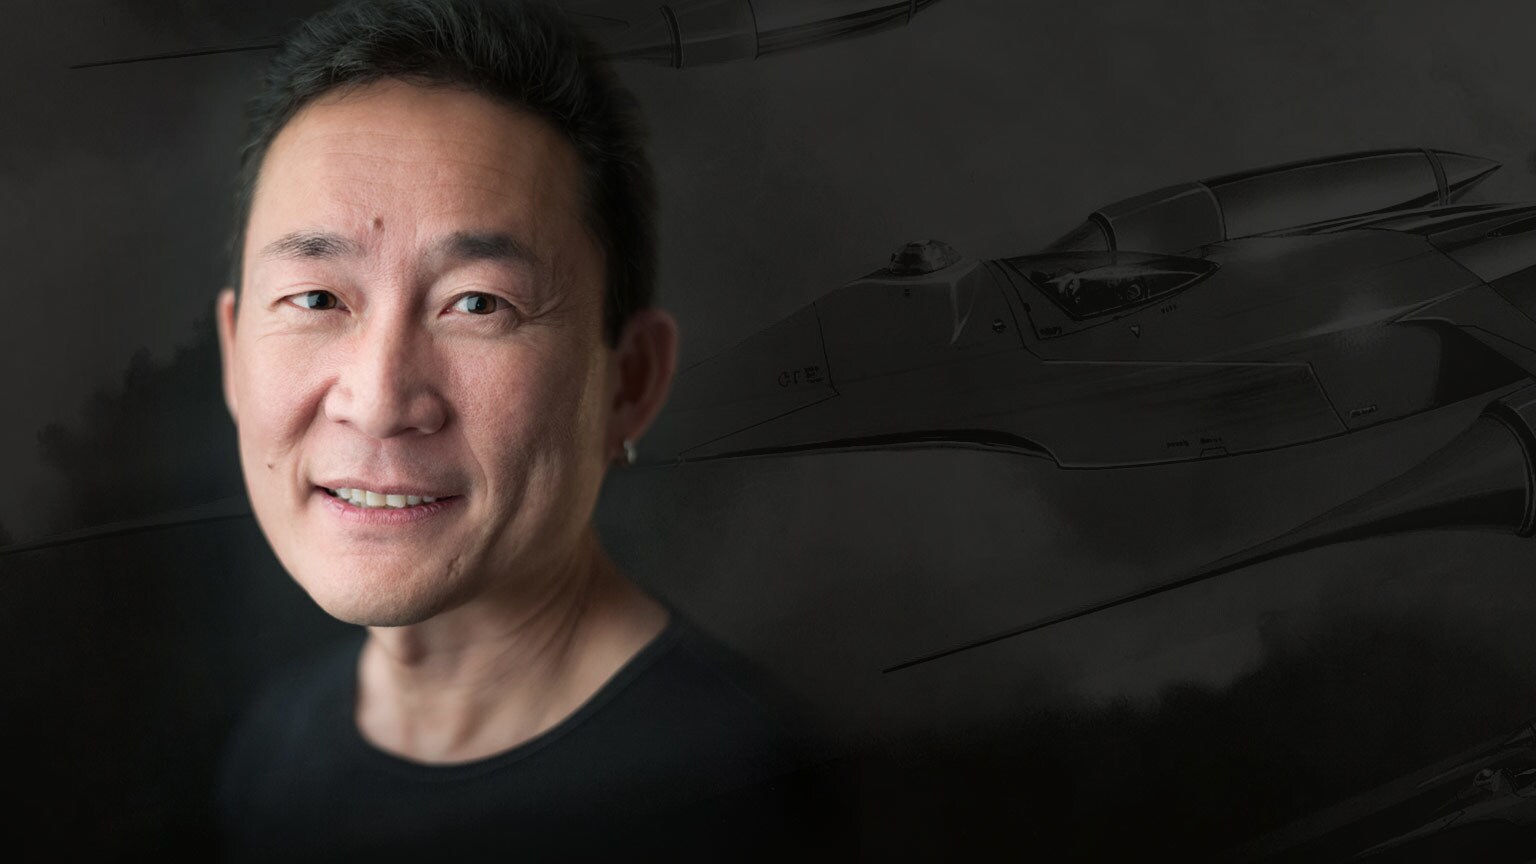 “There is a Strength in Asian Culture”: A Conversation with Lucasfilm Legend Doug Chiang